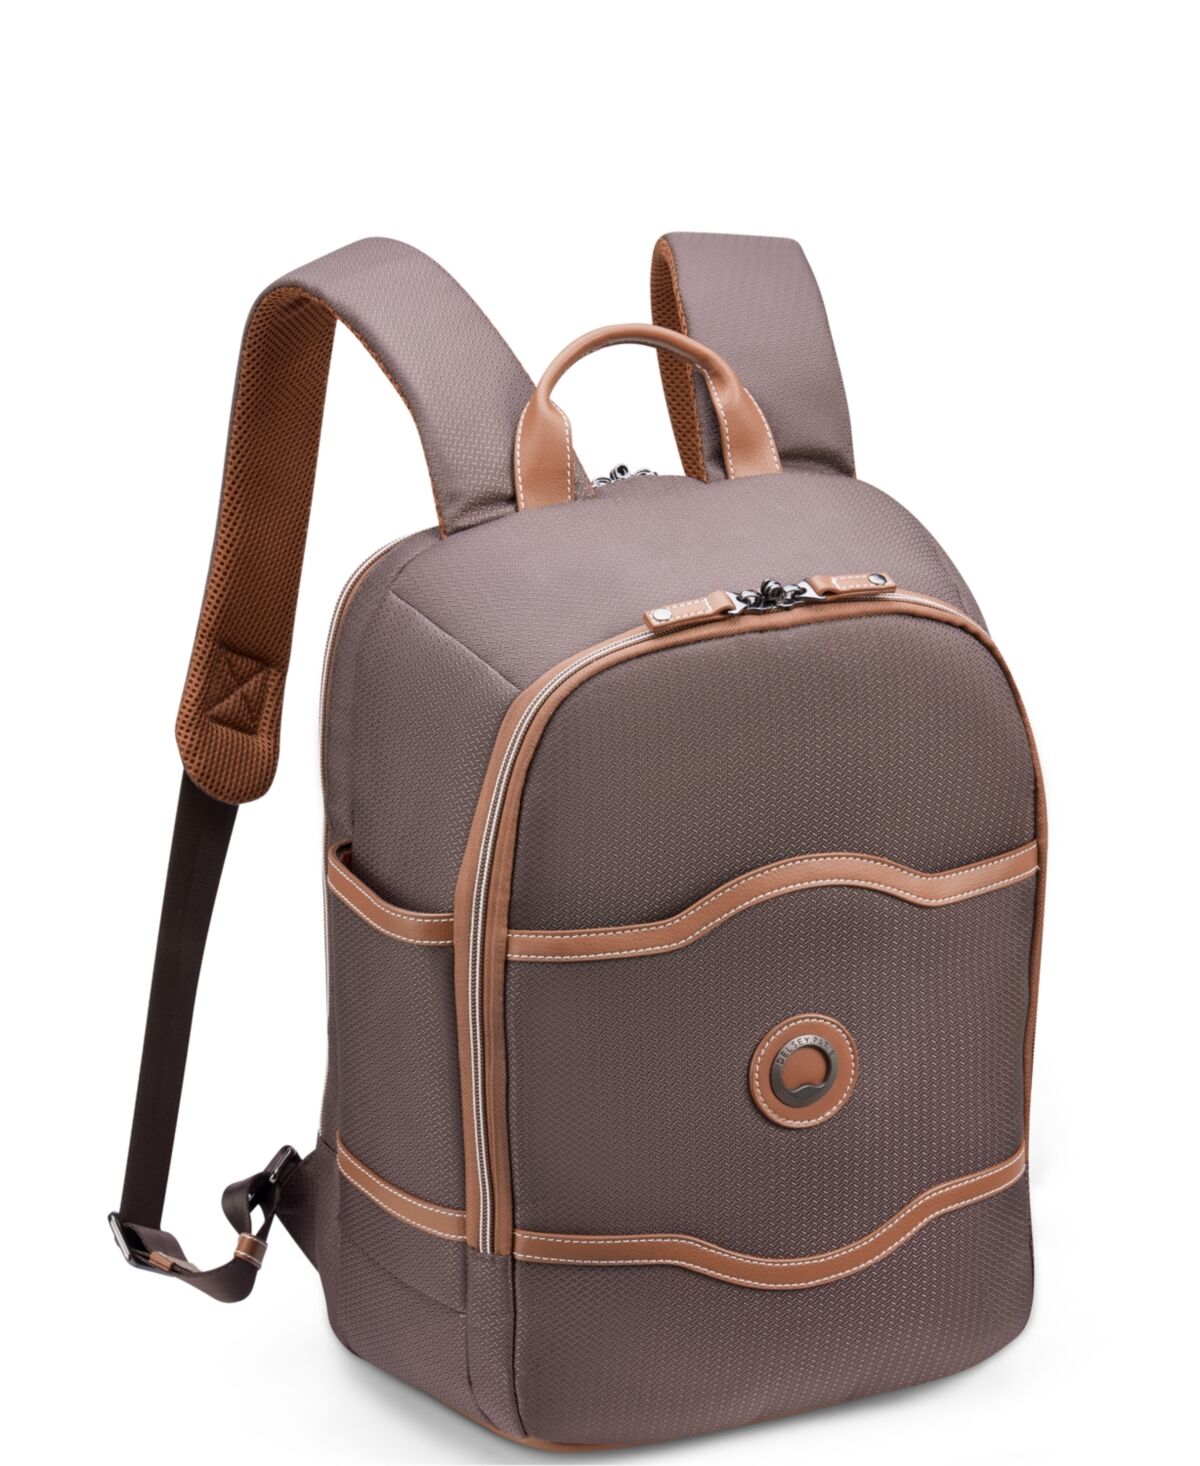 Delsey Chatelet Air 2.0 Backpack - Chocolate